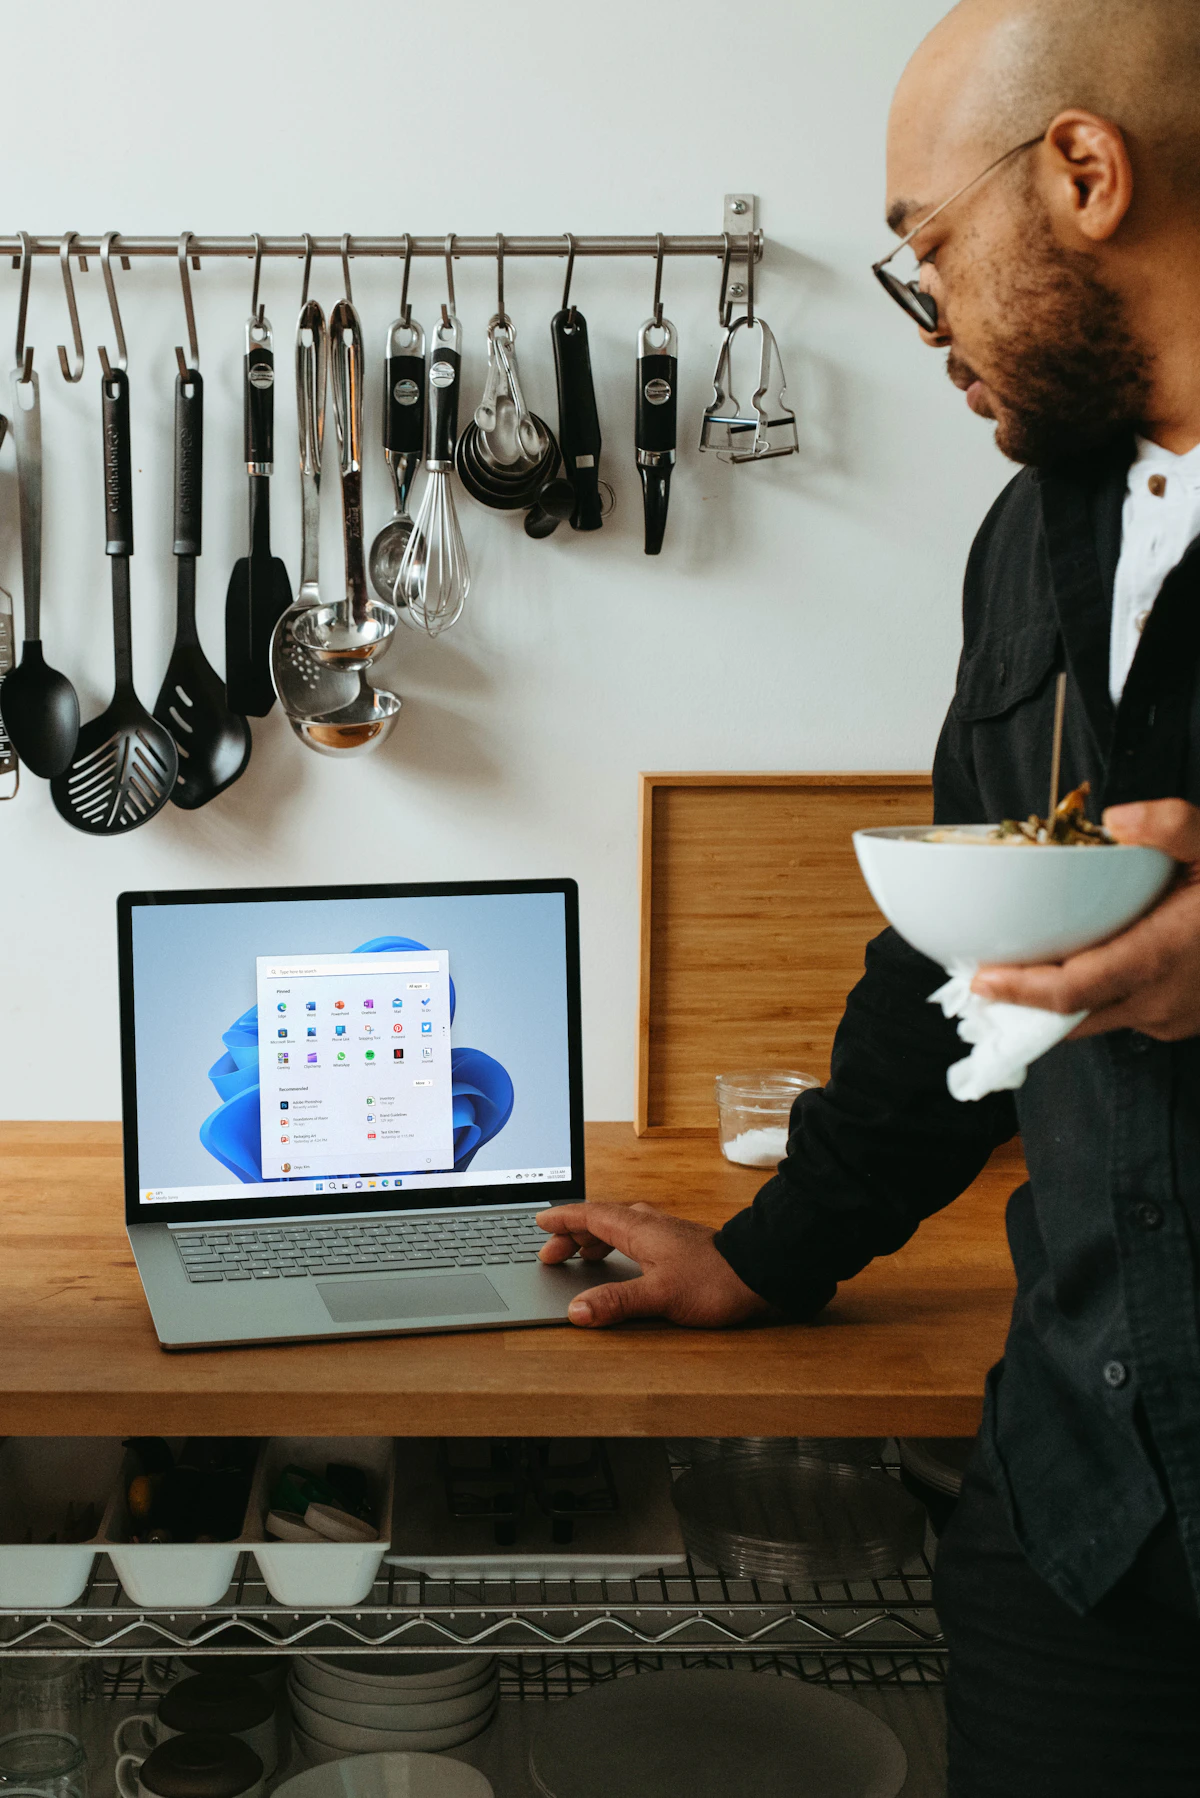 A man touching a Windows laptop while holding a bowl of food in a kitchen.